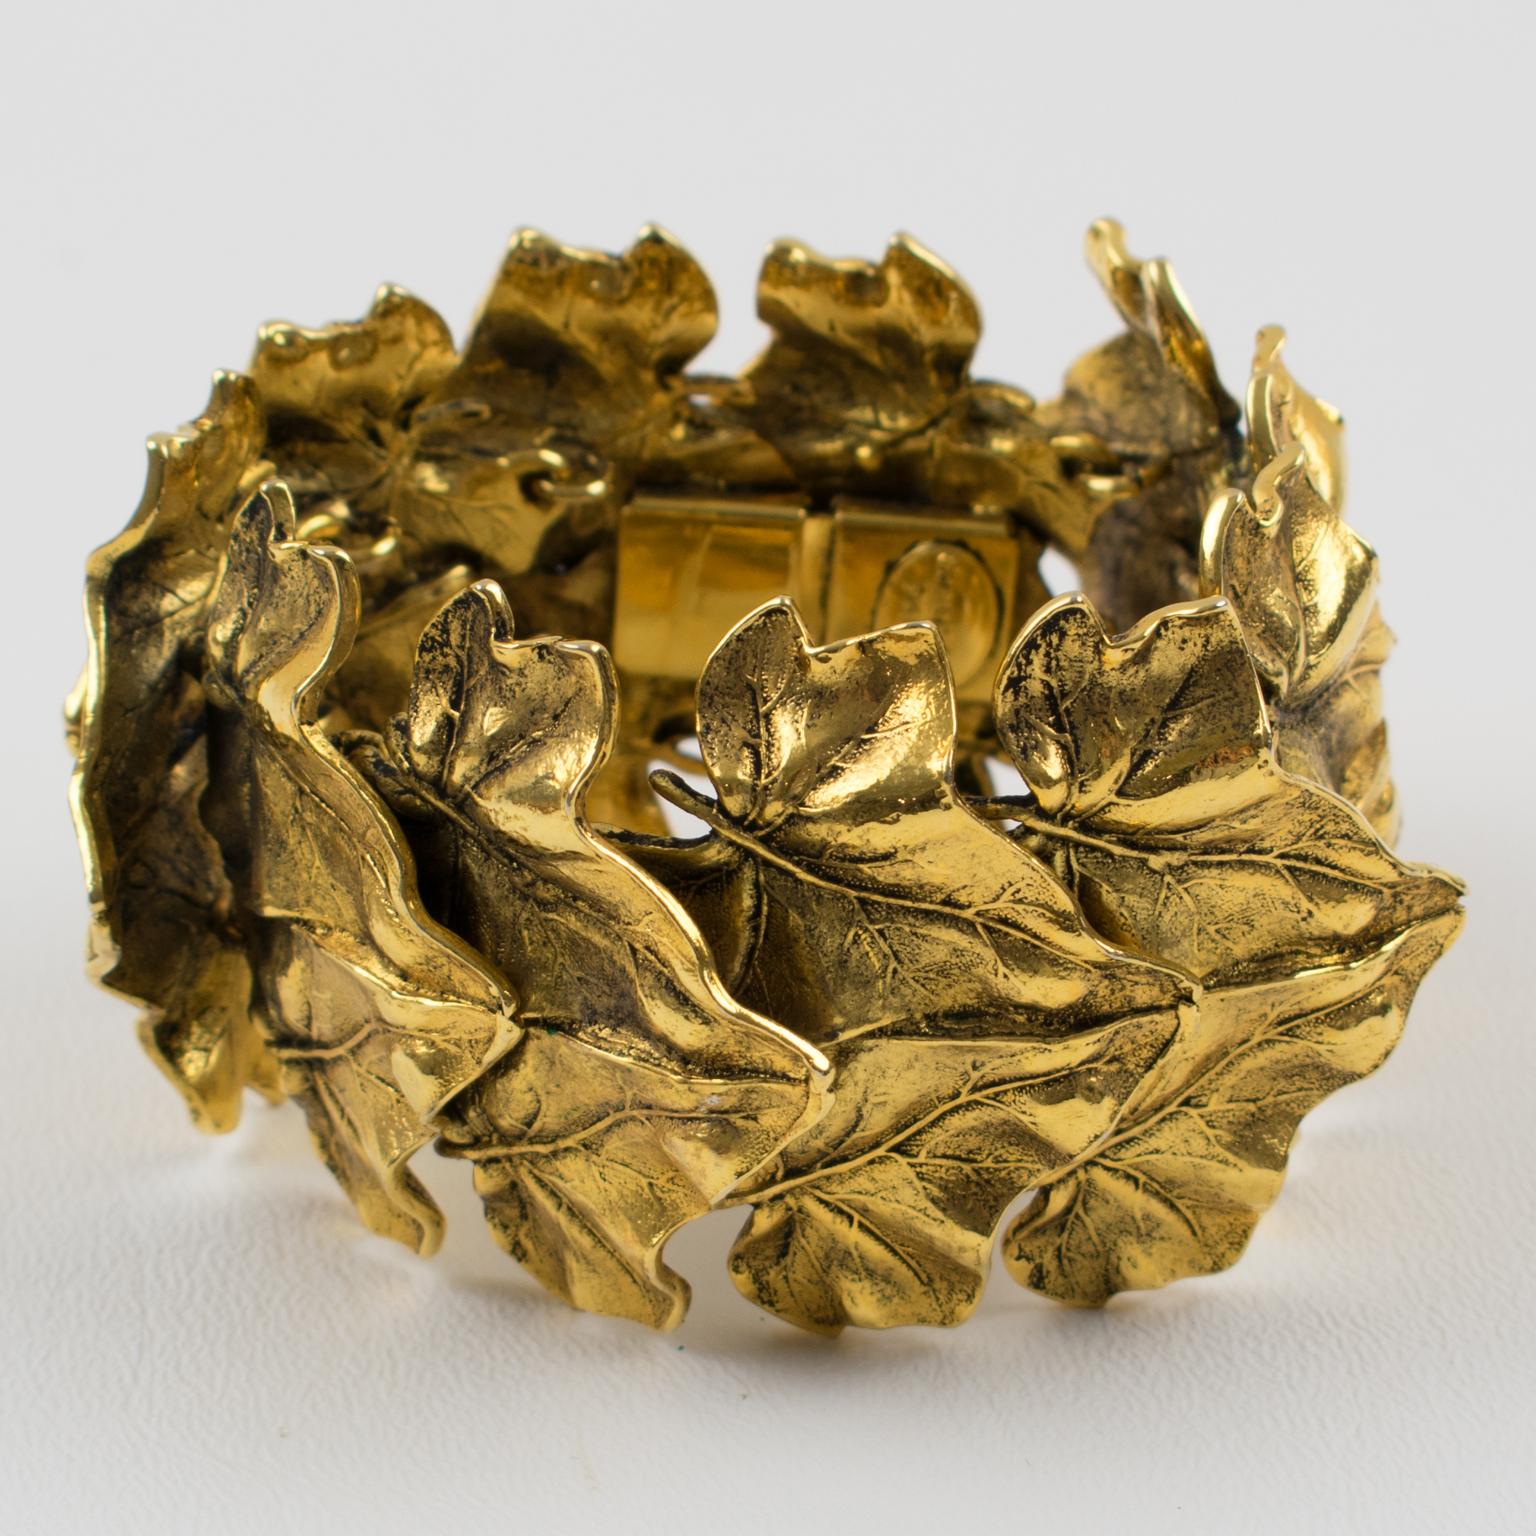 Lovely Sonia Rykiel Paris signed link bracelet. Massive articulated shape with gilt metal all textured and carved featuring large leaves. Signed by famous French Jewel and Fashion Designer Sonia Rykiel, gilded tag underside reads: Sonia Rykiel